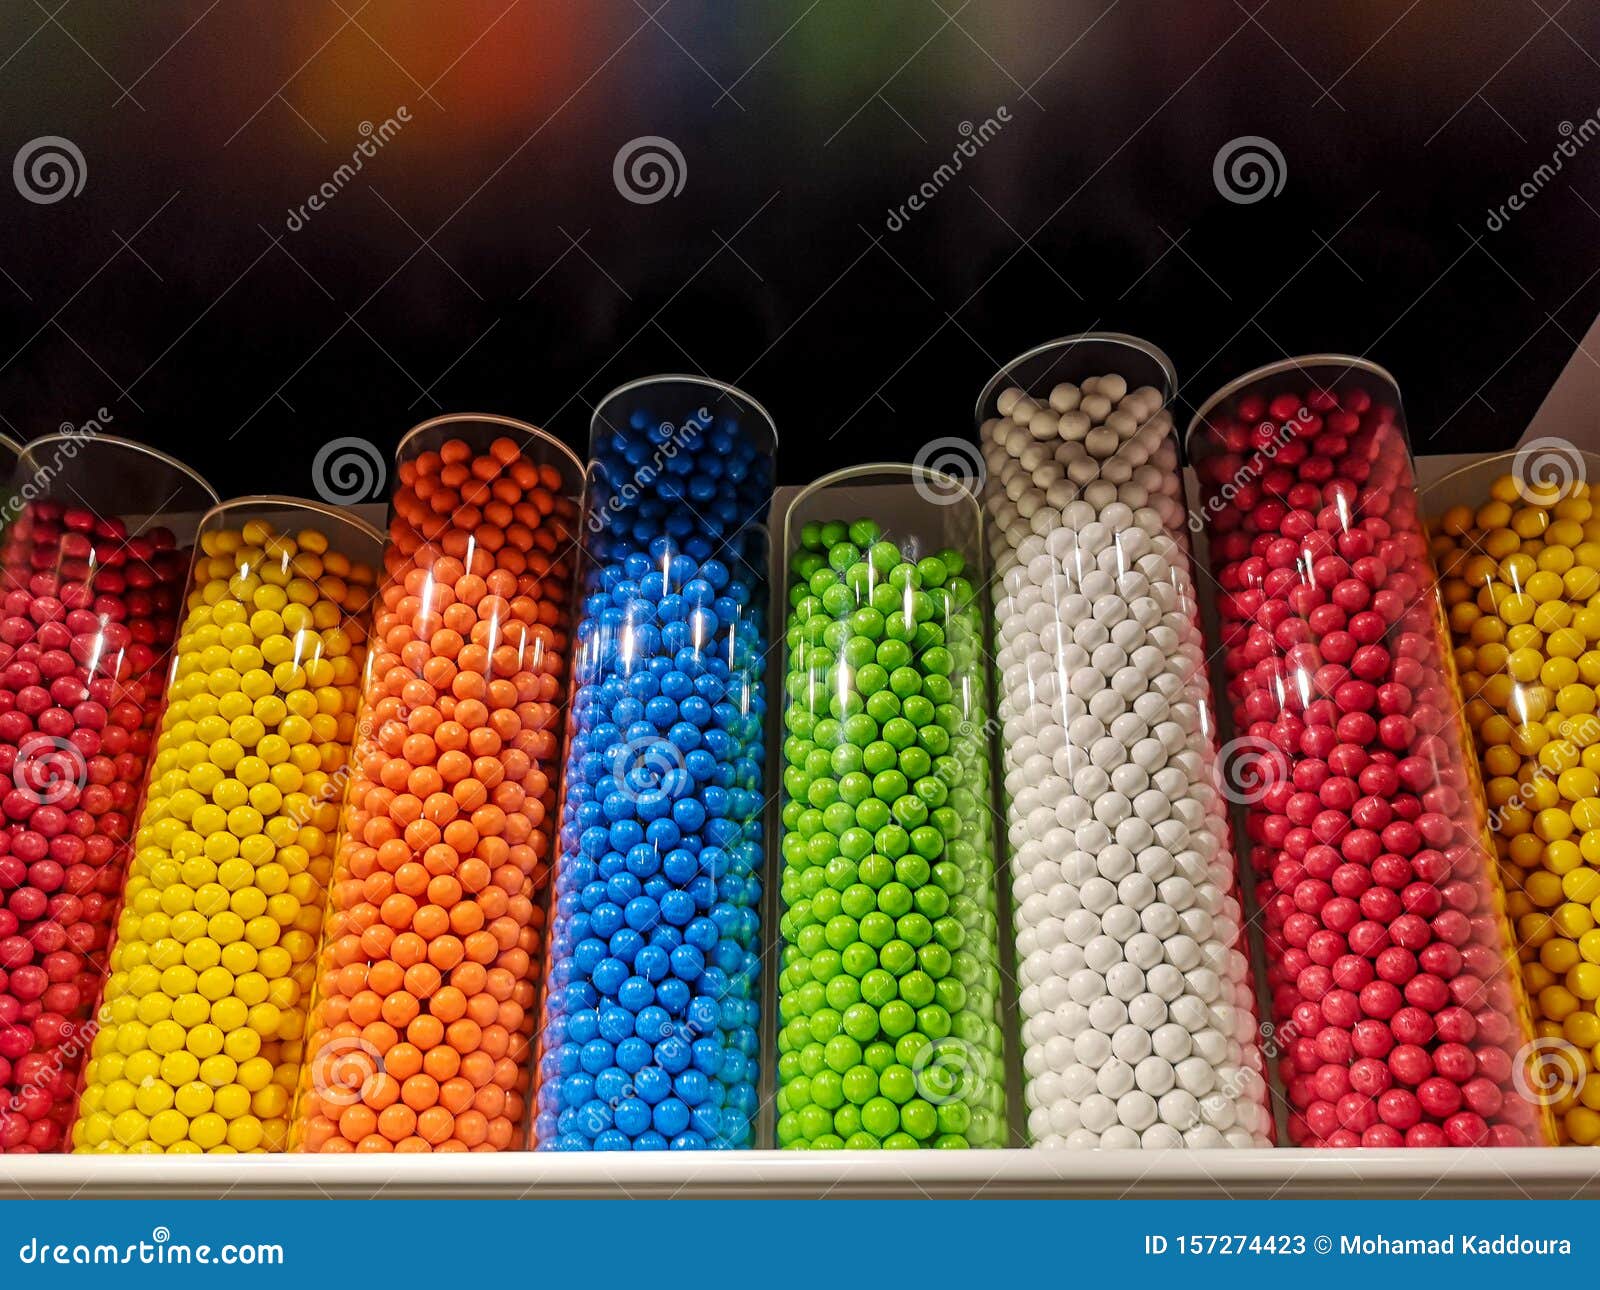 Many Colorful Candies Different Types Of Candy In A Jar Stock Image